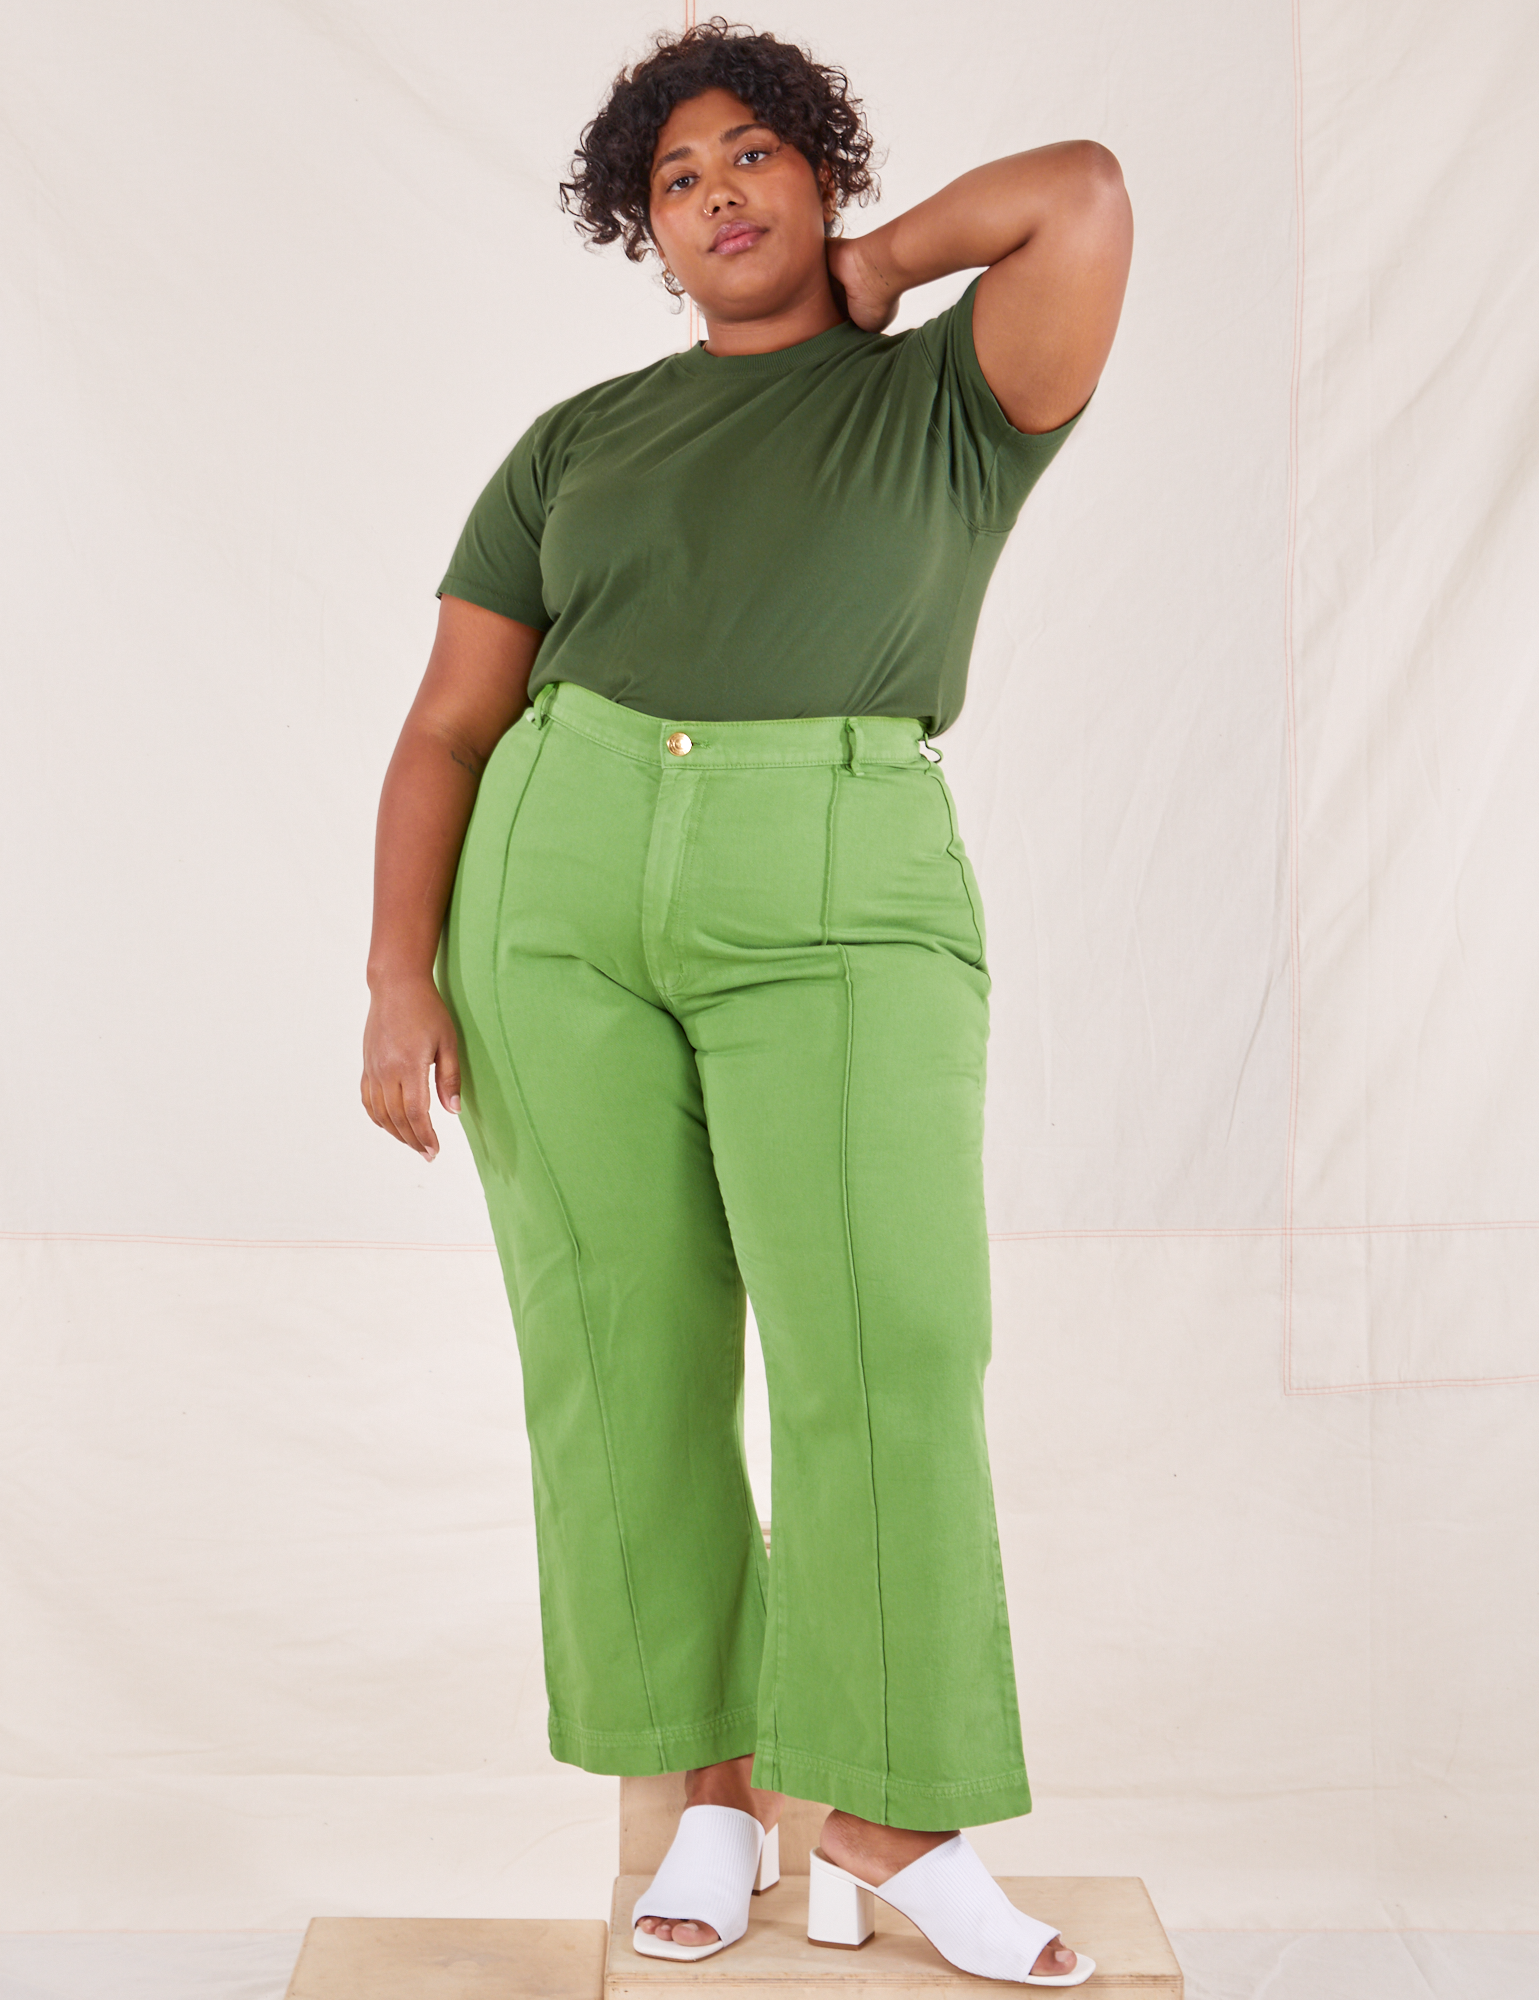 Morgan is wearing L Organic Vintage Tee in Dark Emerald Green paired with gross green Western Pants